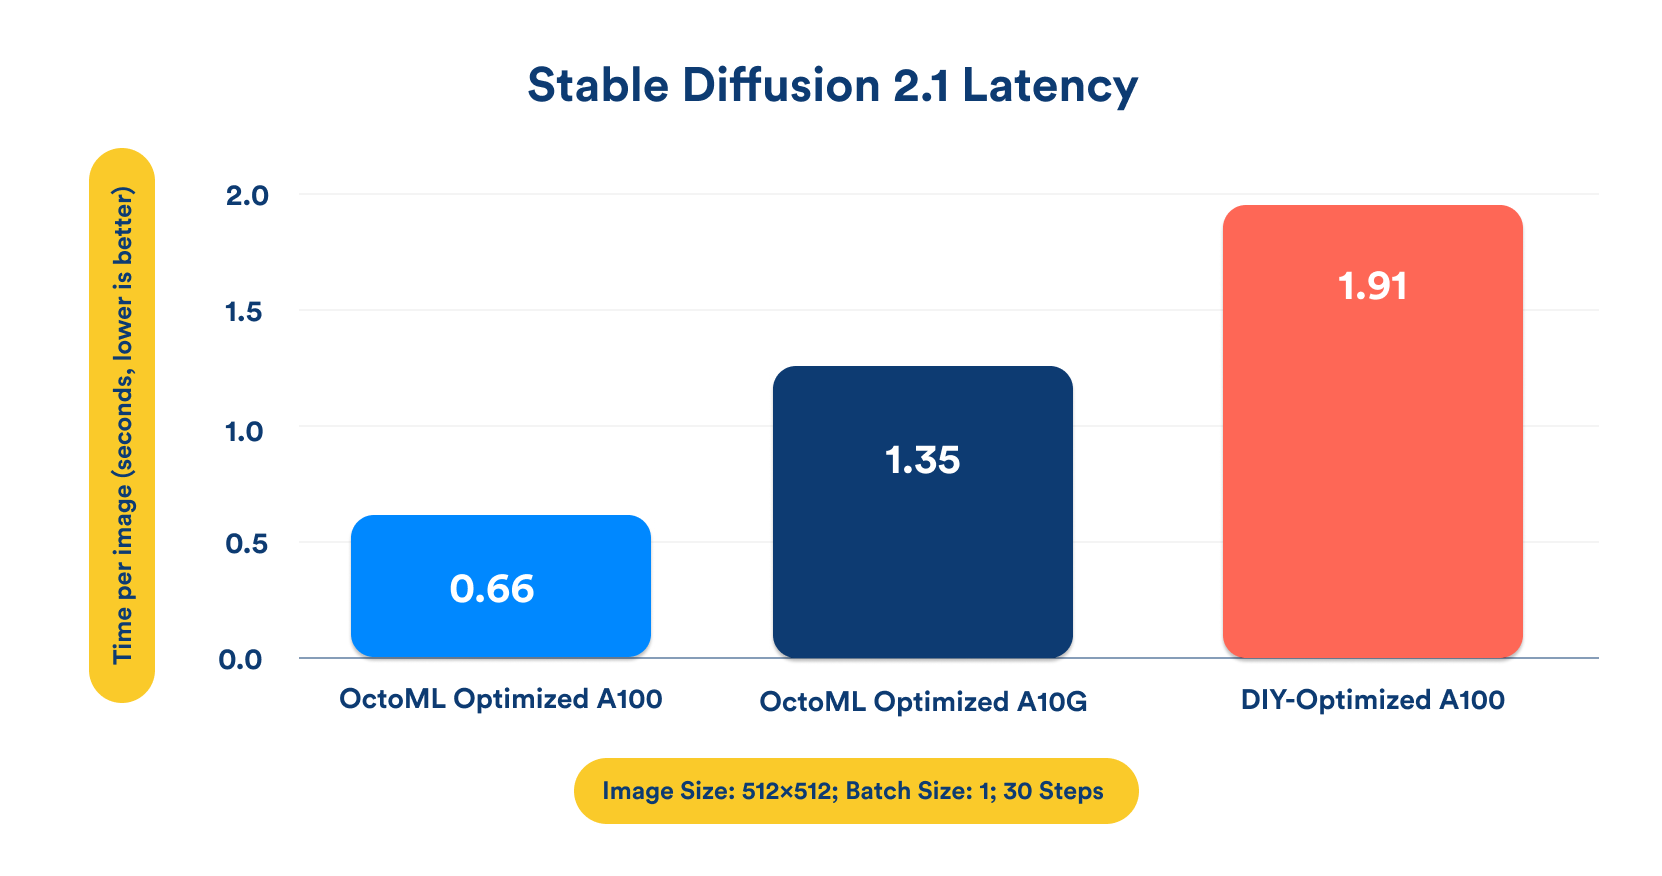 Table showing Stable Diffusion latency measurements using OctoML's optimized much faster versions compared to DIY optimization